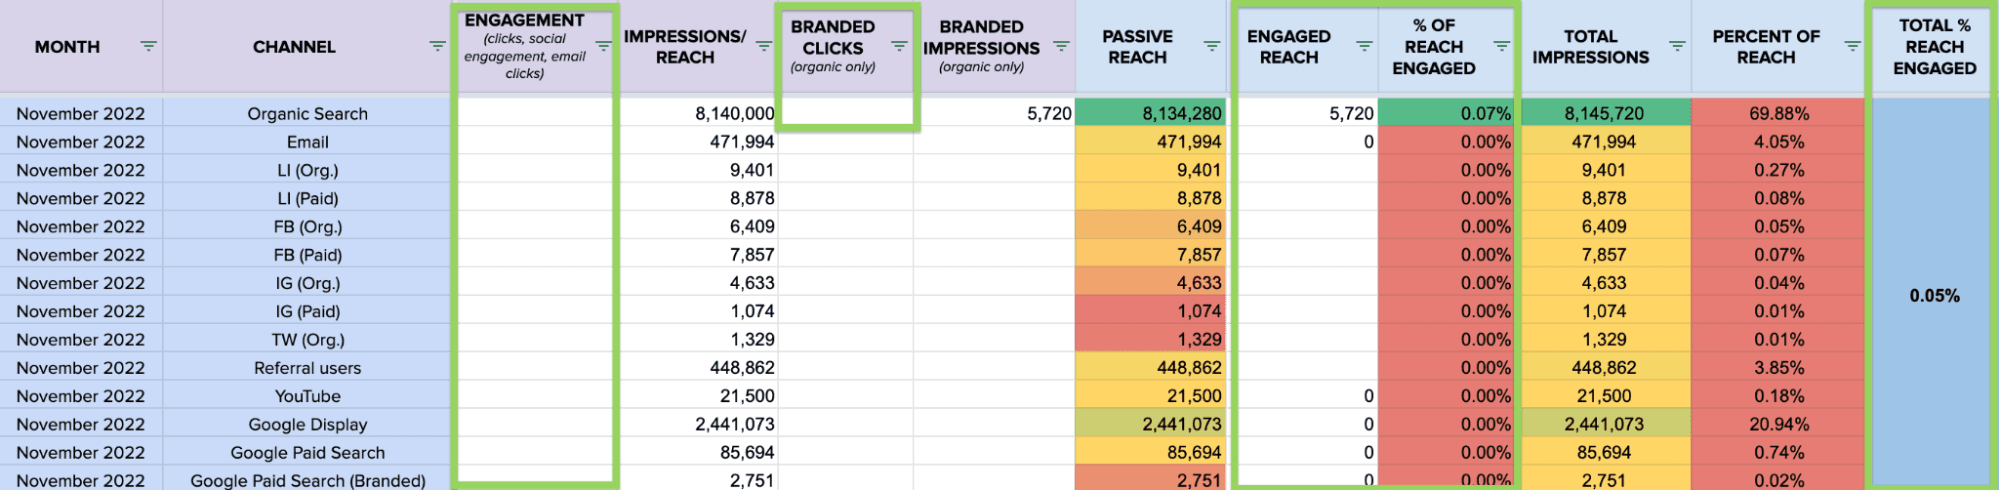 1676979054 347 How to Use Estimated Brand Reach as a Meaningful Marketing